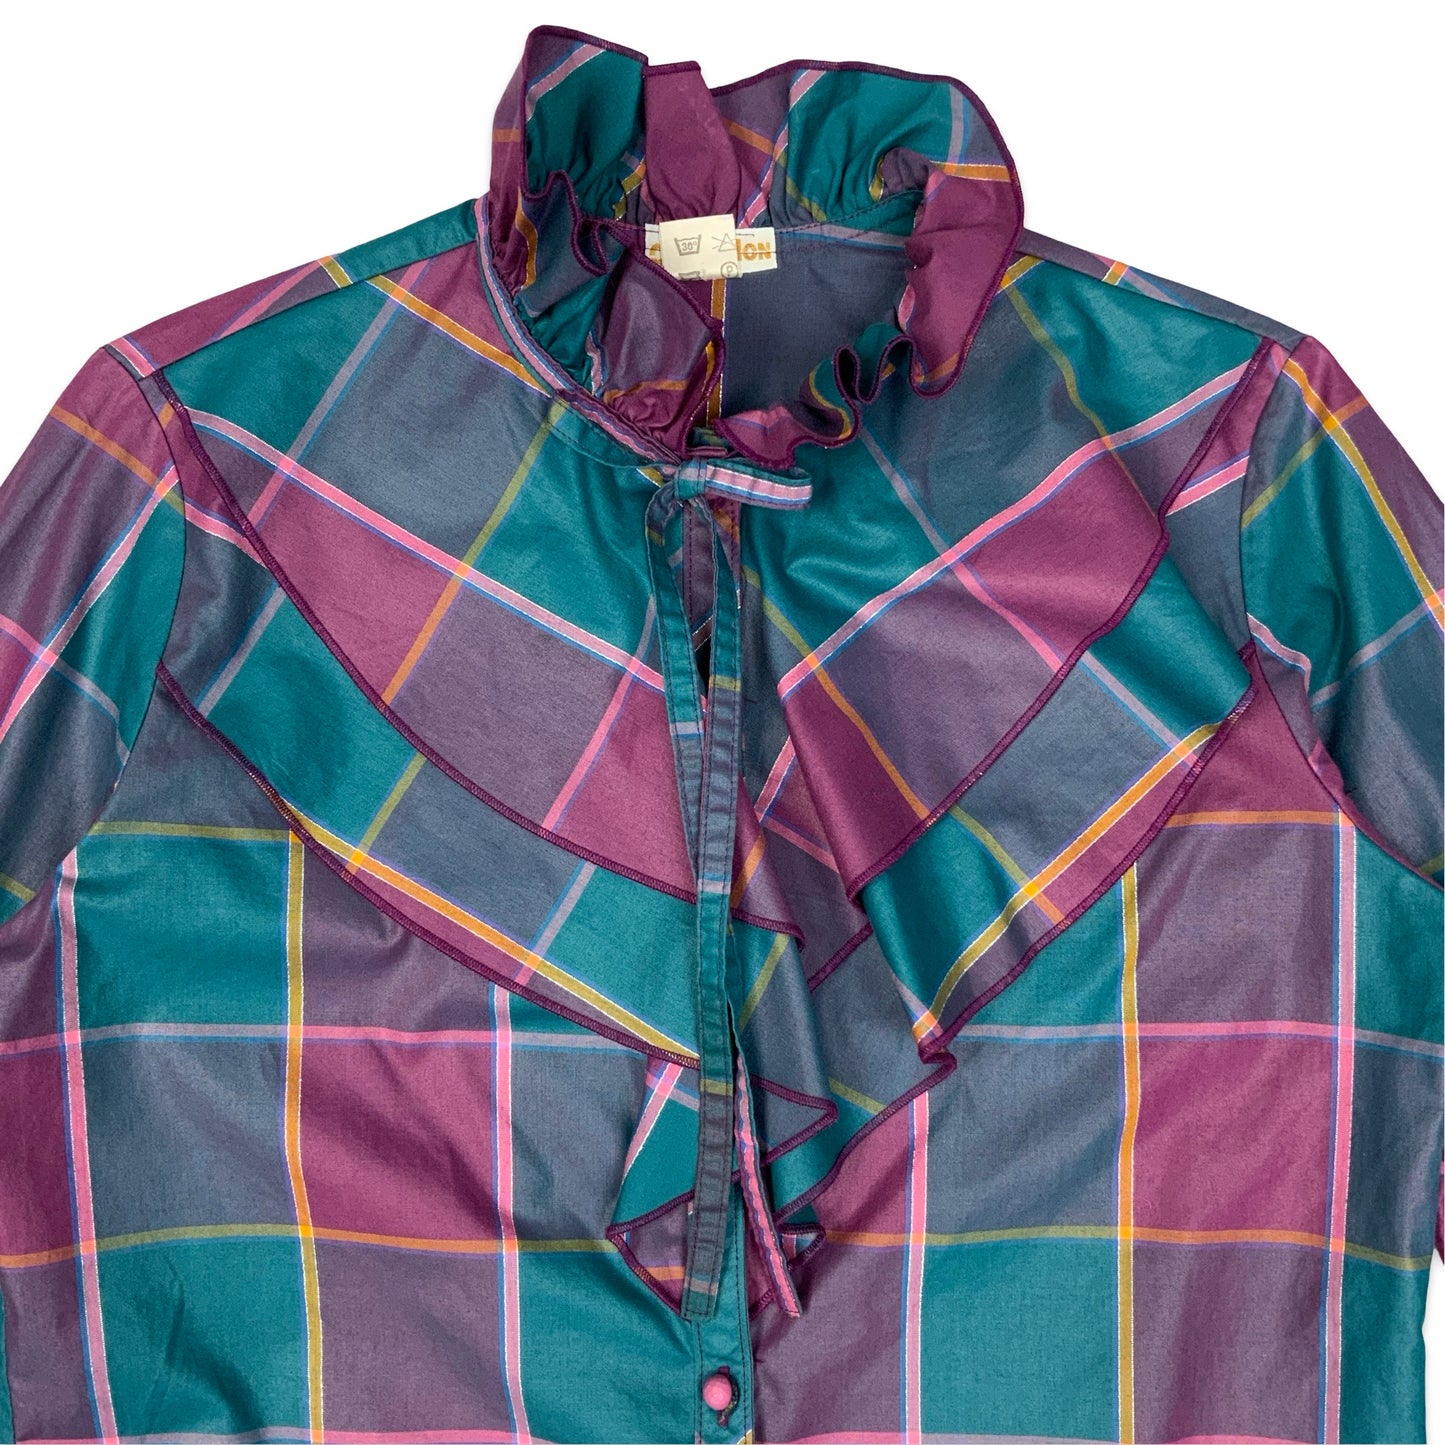 Vintage Purple & Teal Check Shirt with Frilly Collar 12